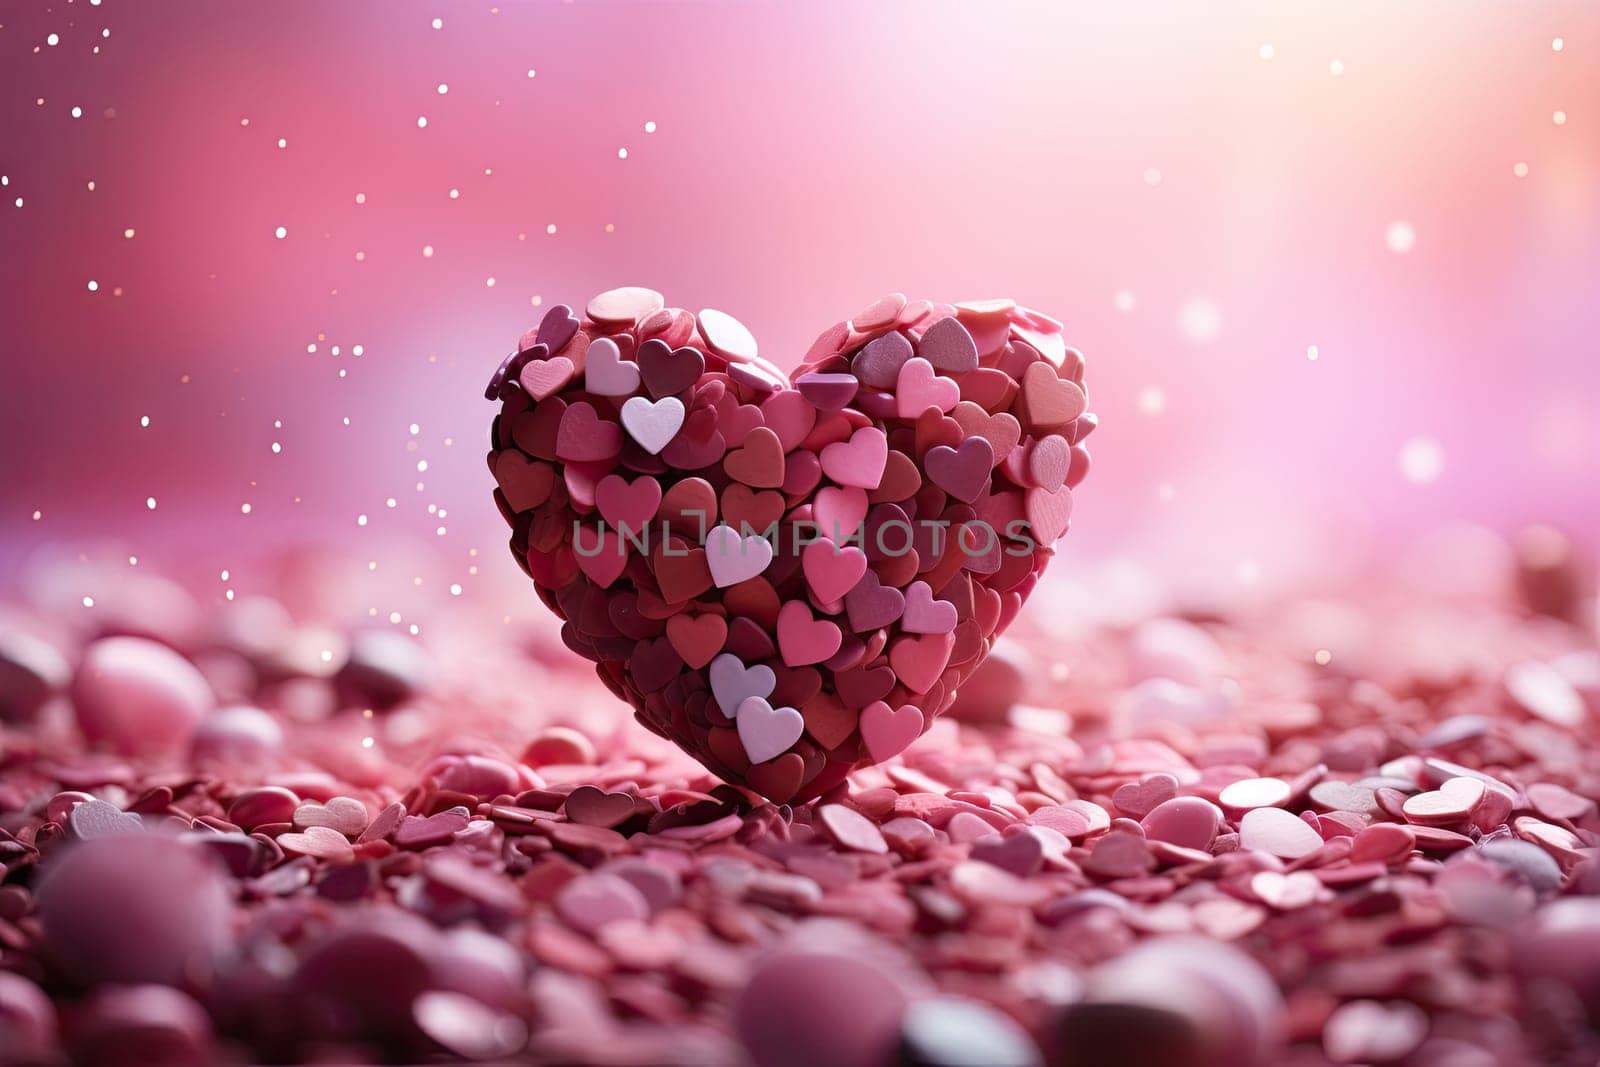 an image of a heart shape filled with pink hearts by golibtolibov